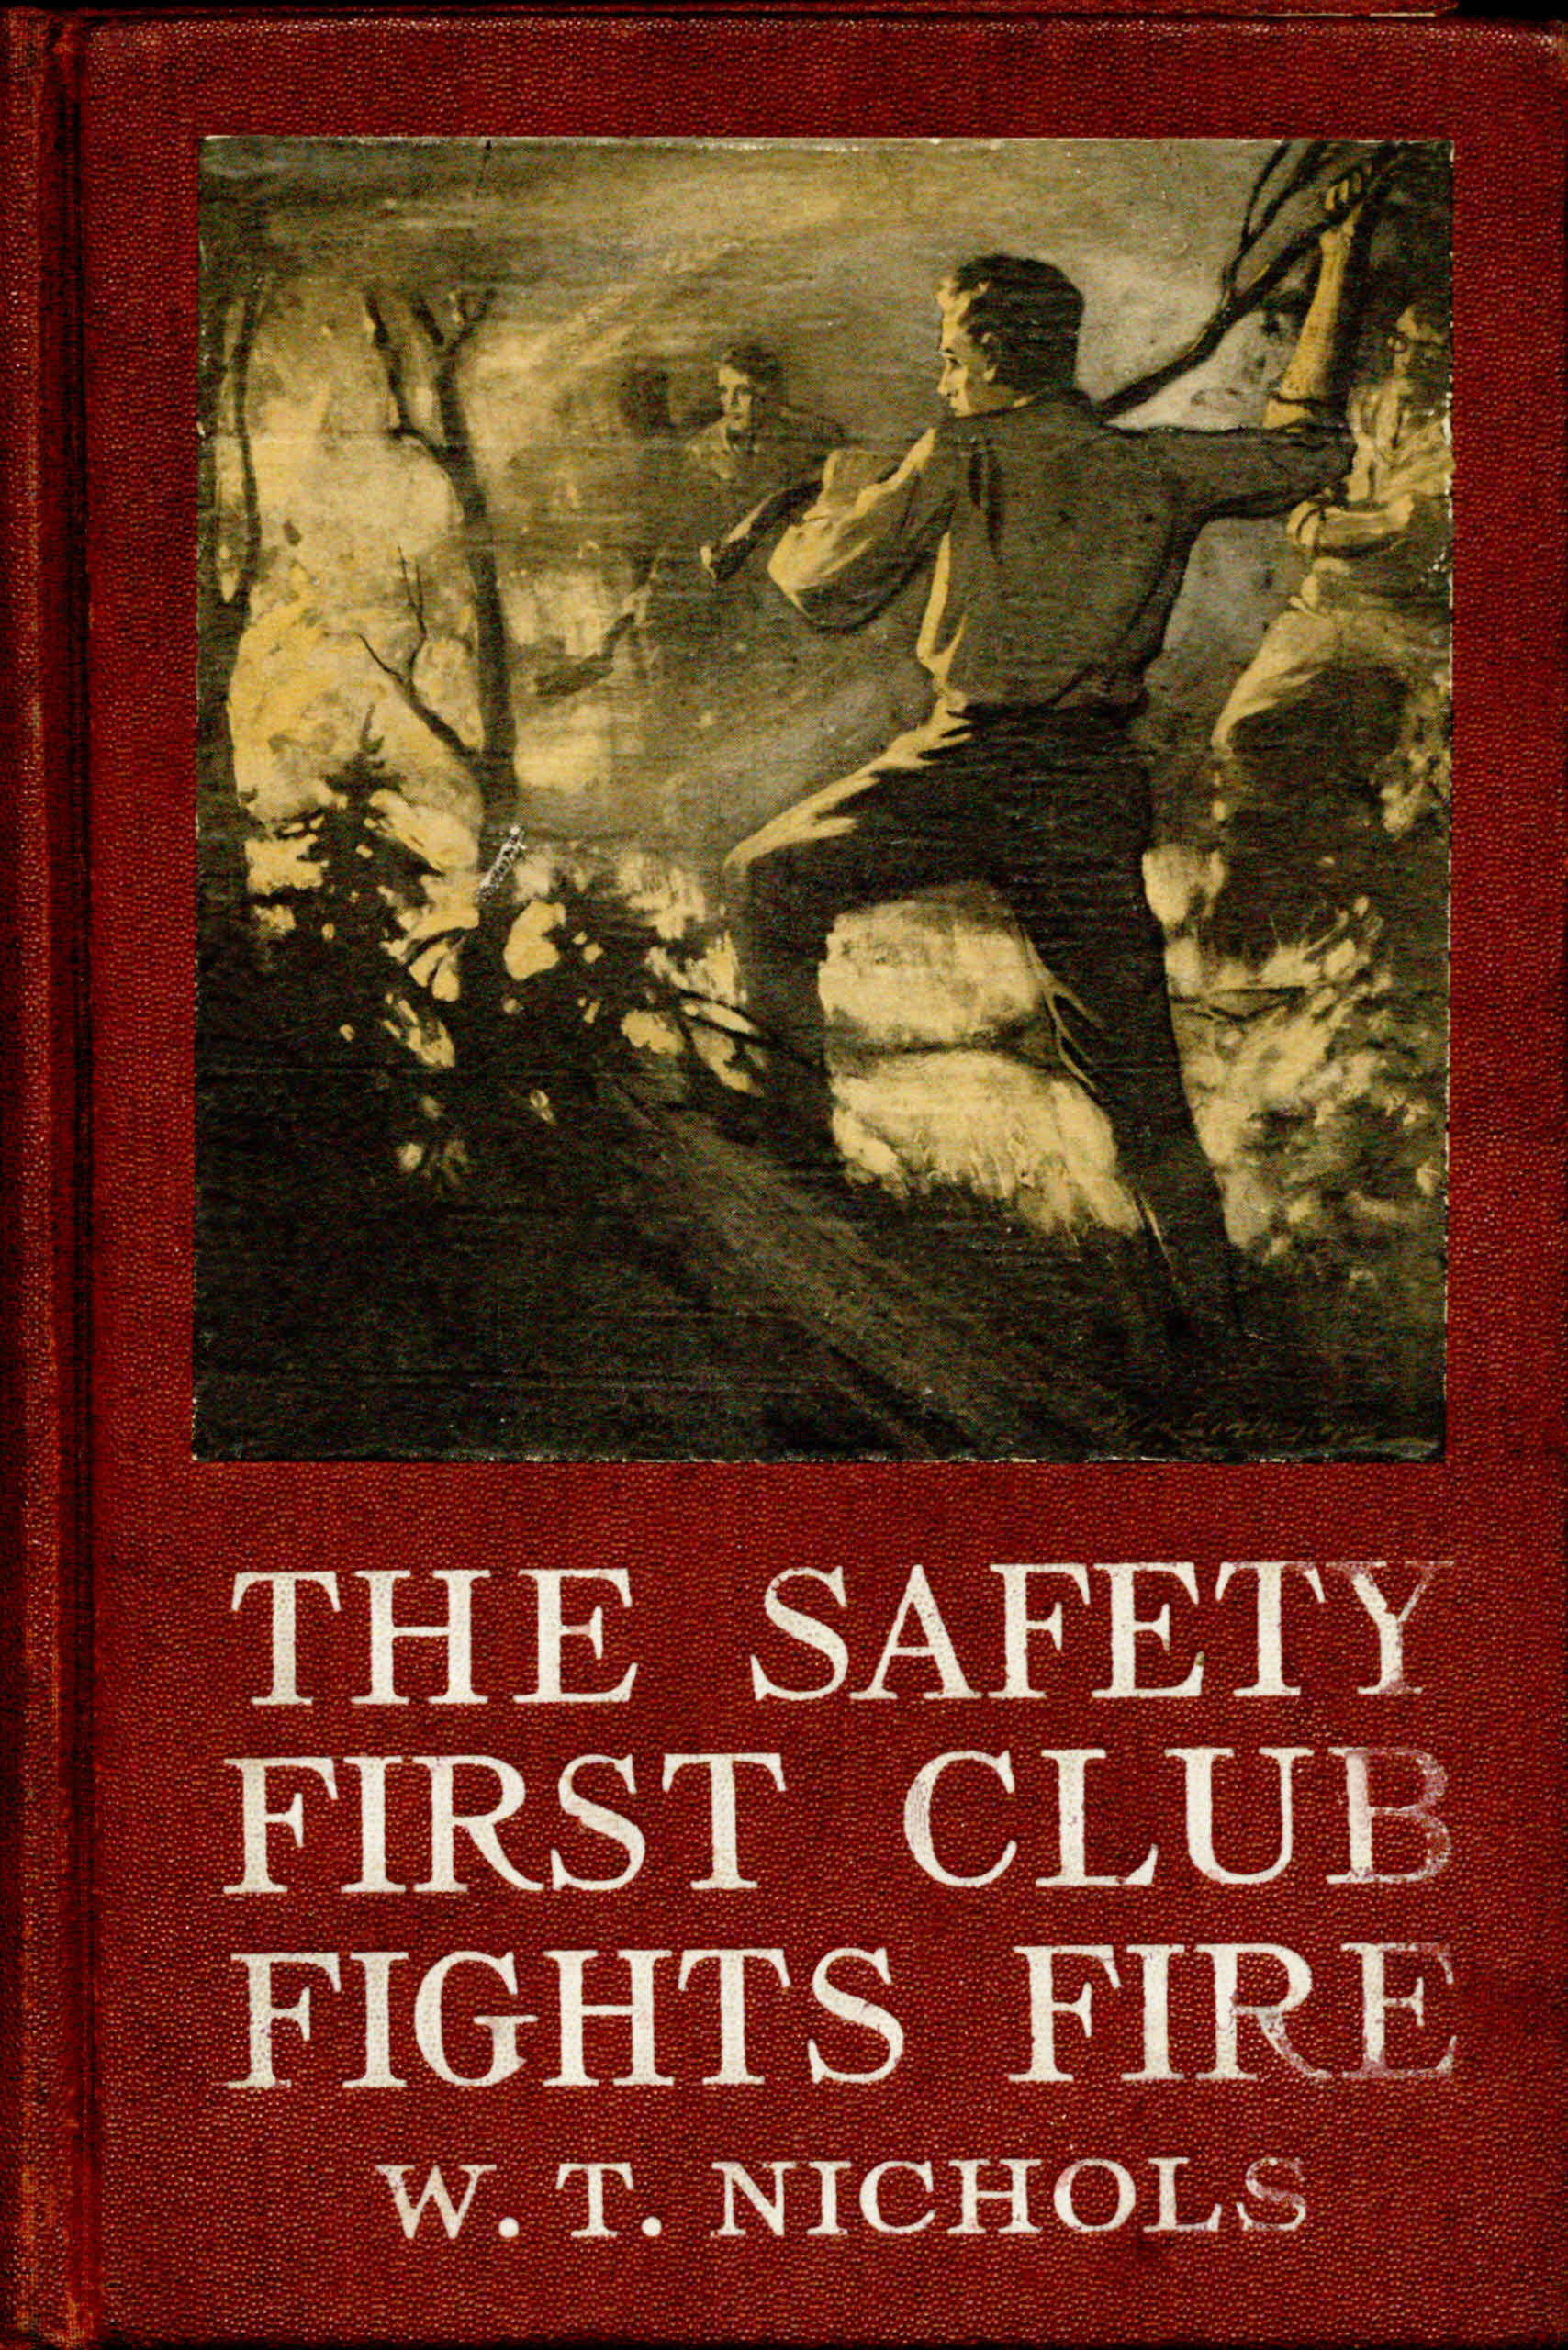 The Safety First Club Fights Fire | Project Gutenberg